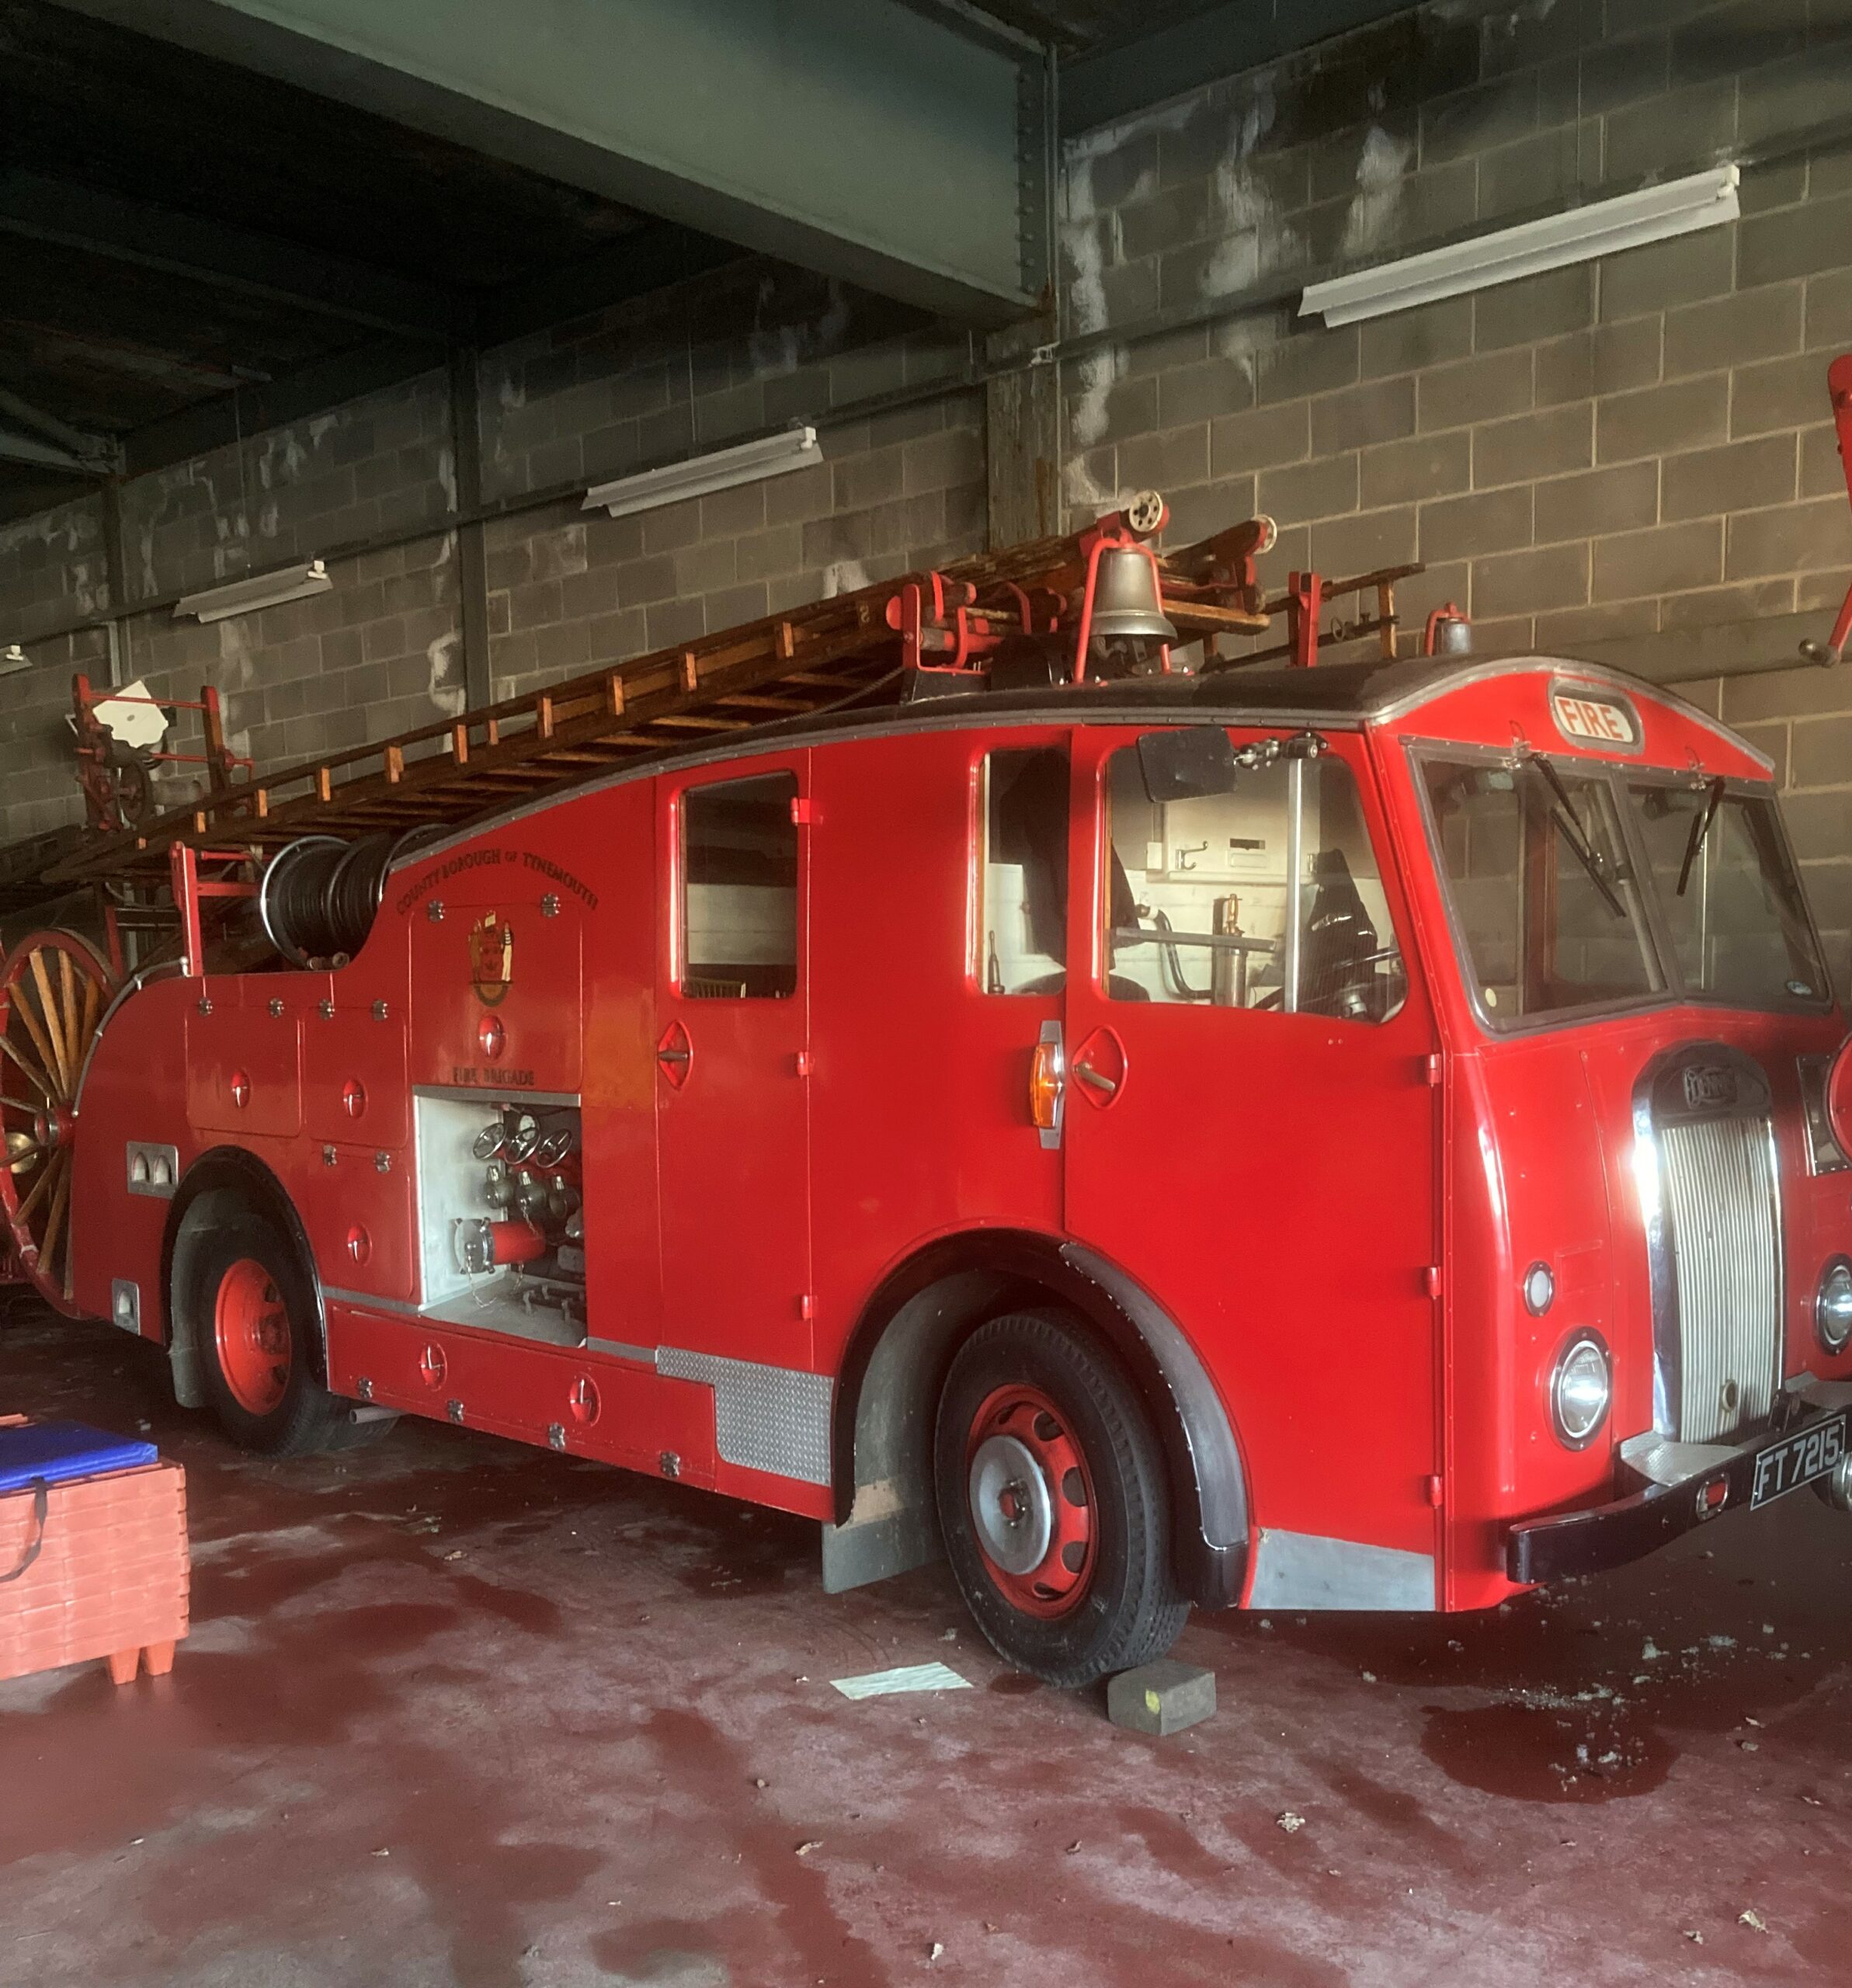 A photograph of the vintage Dennis fire appliance that led Wilfred's funeral cortege.